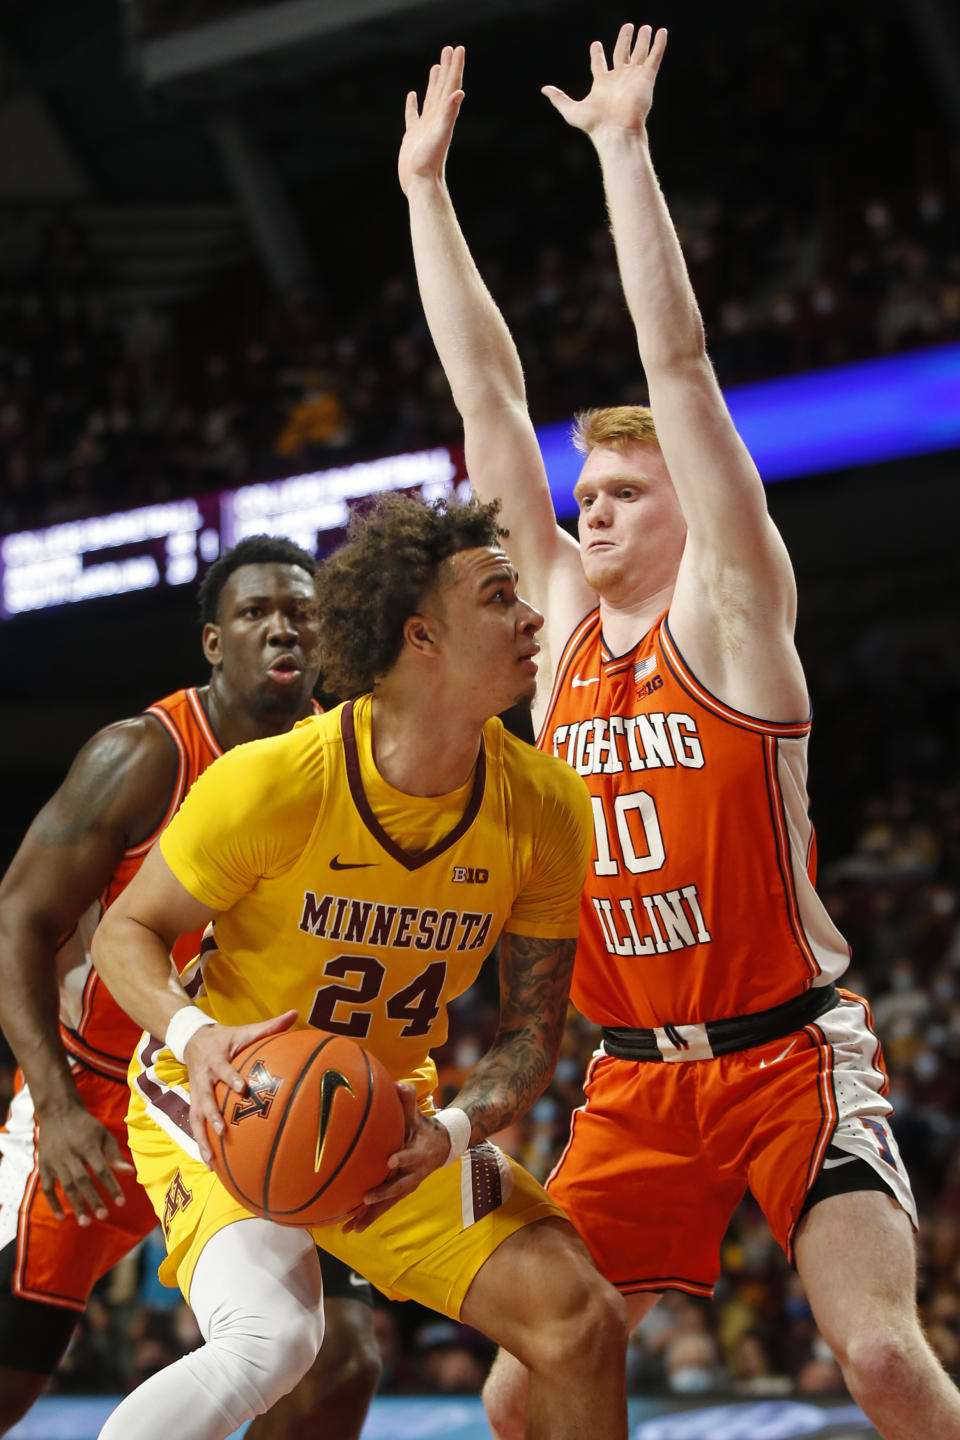 Minnesota guard Sean Sutherlin (24) looks to the basket as Illinois guard Luke Goode (10) defends during the first half of an NCAA college basketball game Tuesday, Jan. 4, 2022, in Minneapolis. (AP Photo/Bruce Kluckhohn)